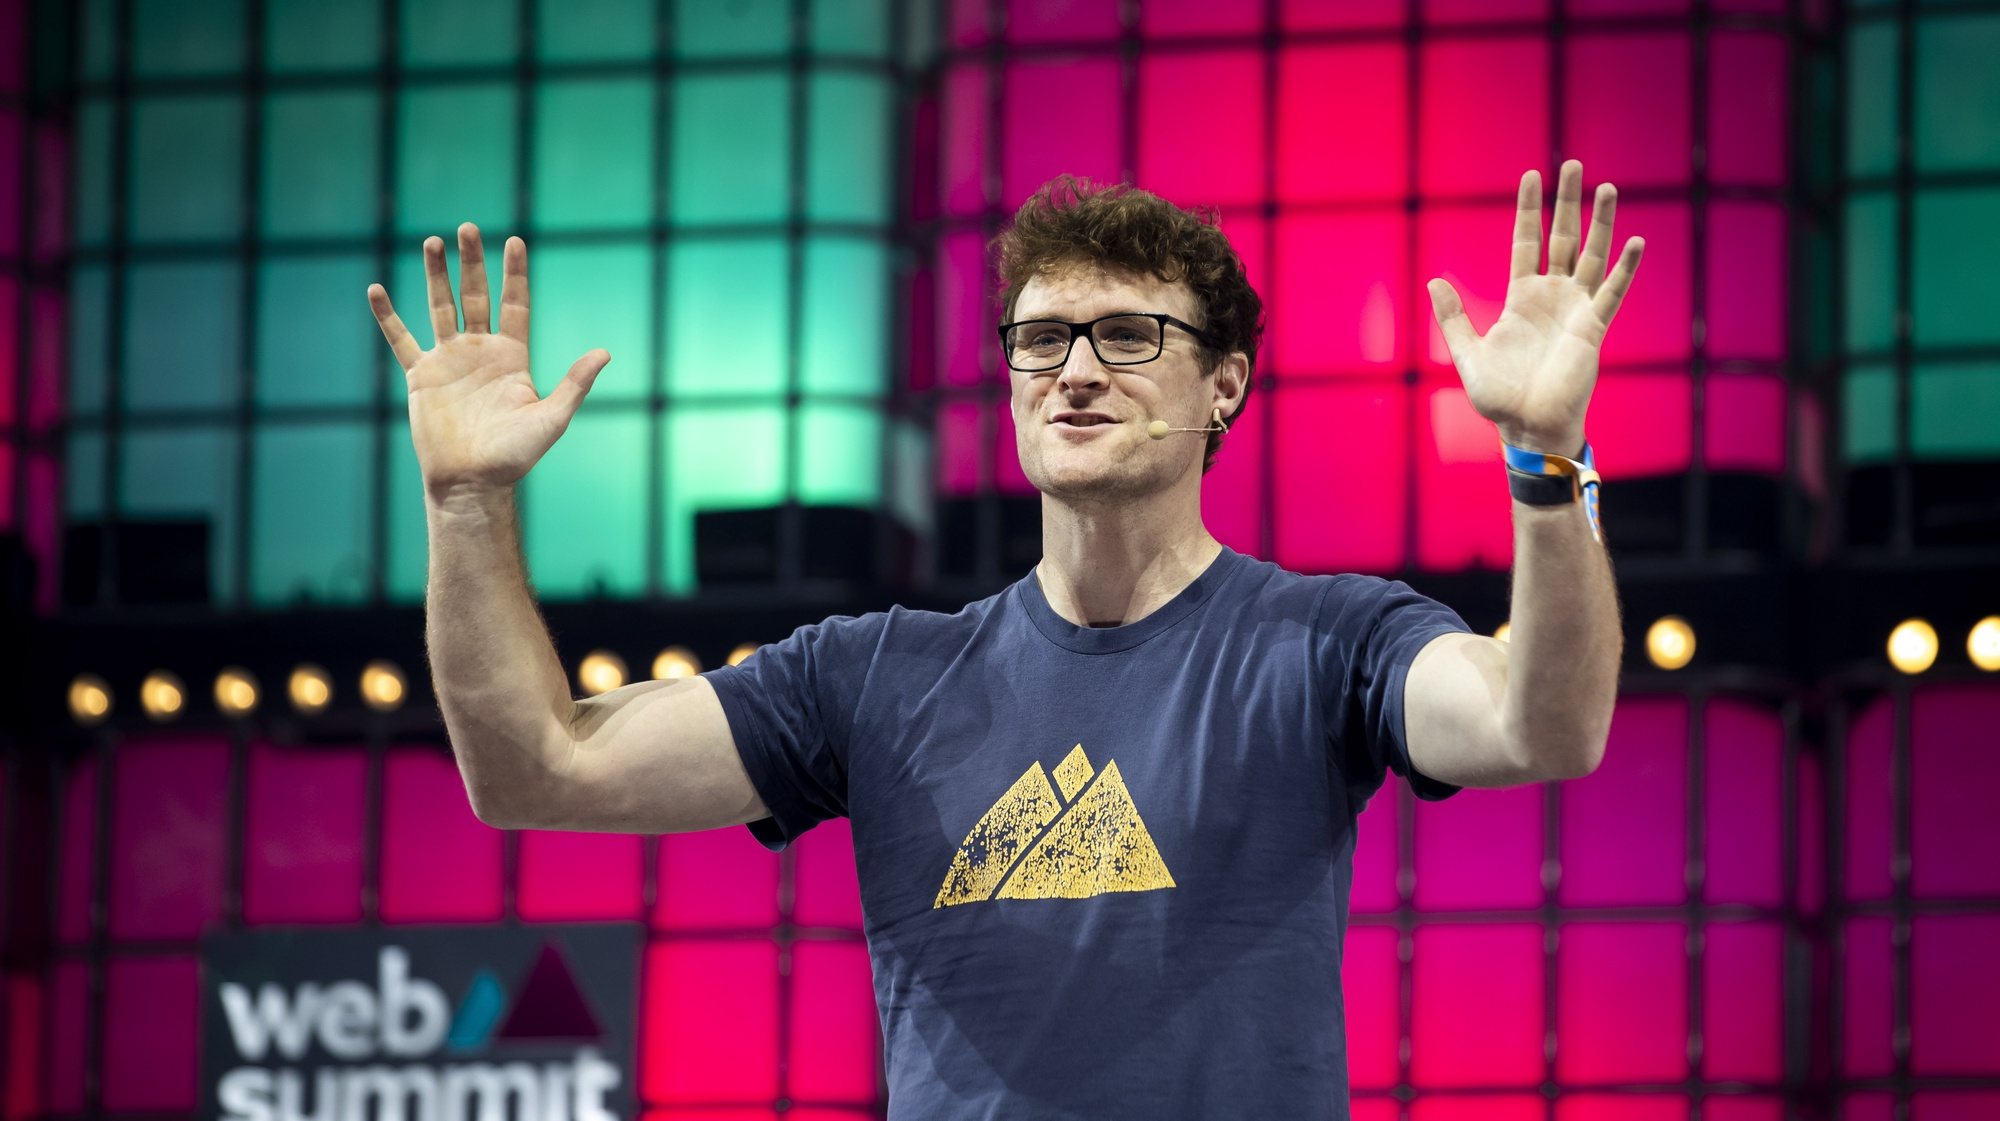 epa10281075 Co-founder of the Web Summit Paddy Cosgrave attends the opening remarks on the second day of the Web Summit at Parque das Nacoes in Lisbon, Portugal, 02 November 2022. The Web Summit is considered the largest event of startups and technological entrepreneurship in the world, and takes place from 01 to 04 November in Lisbon.  EPA/JOSE SENA GOULAO